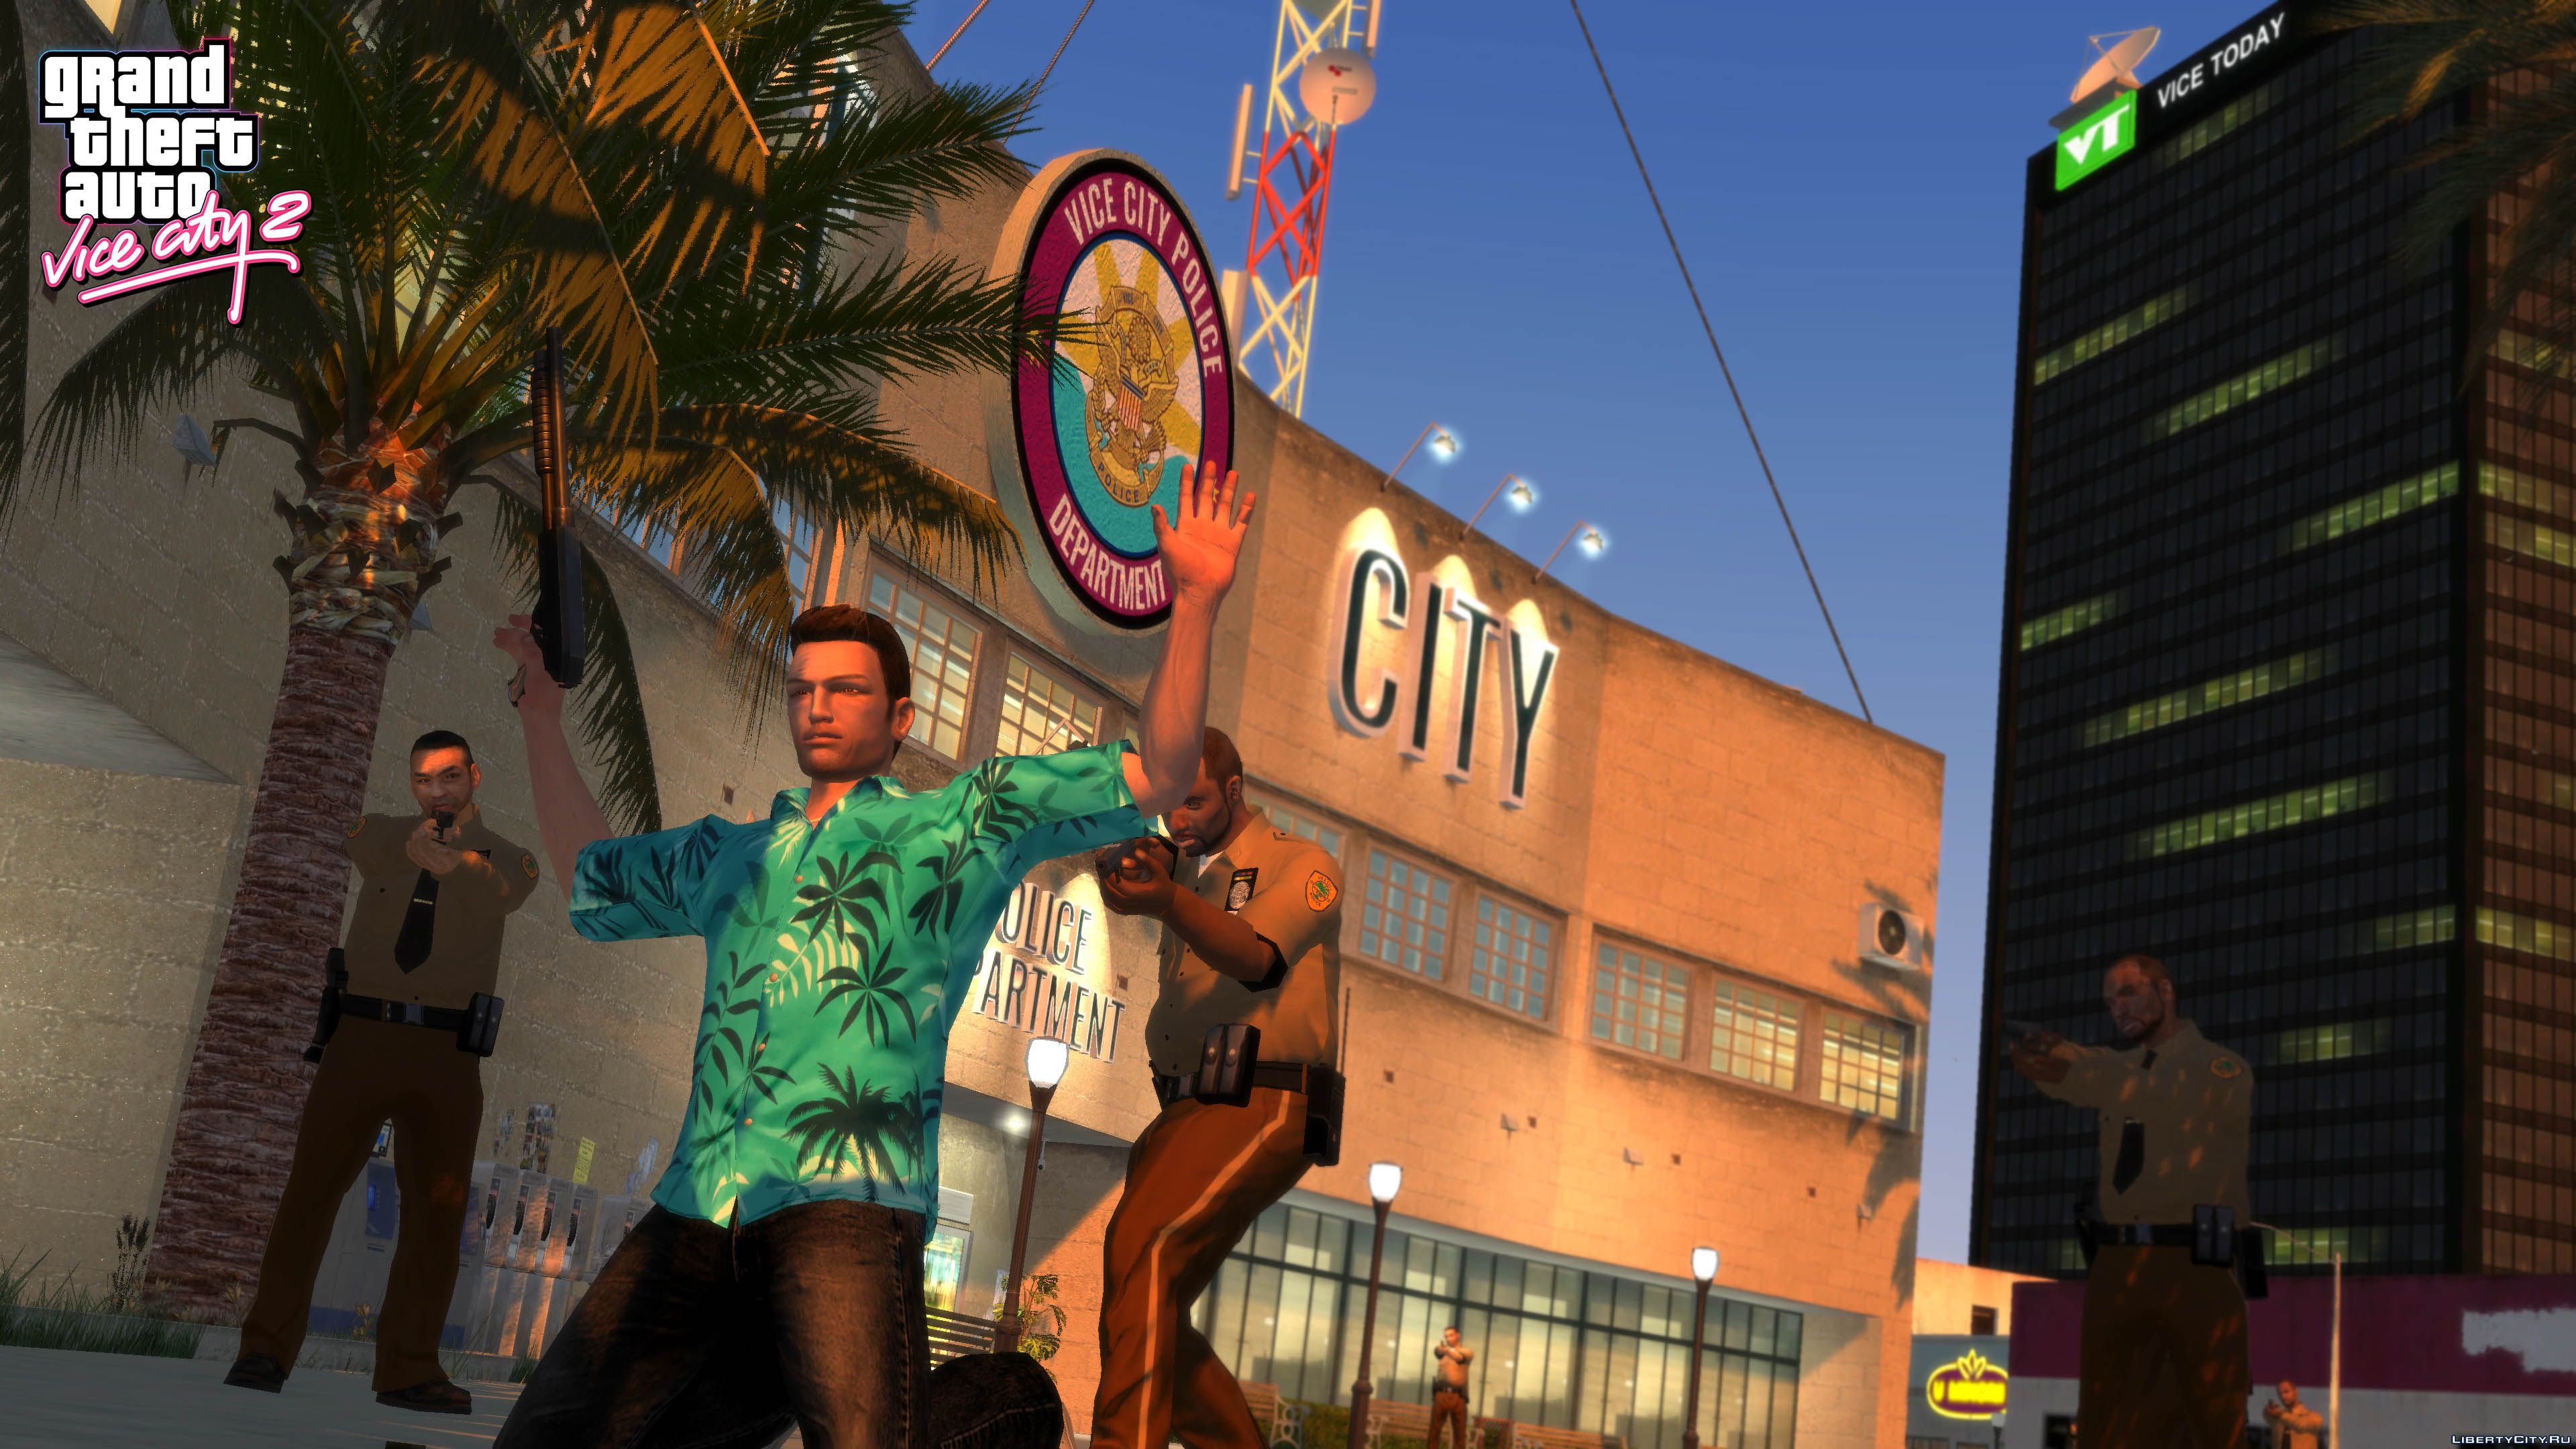 Grand Theft Auto:Vice City Stories graphical issue makes game